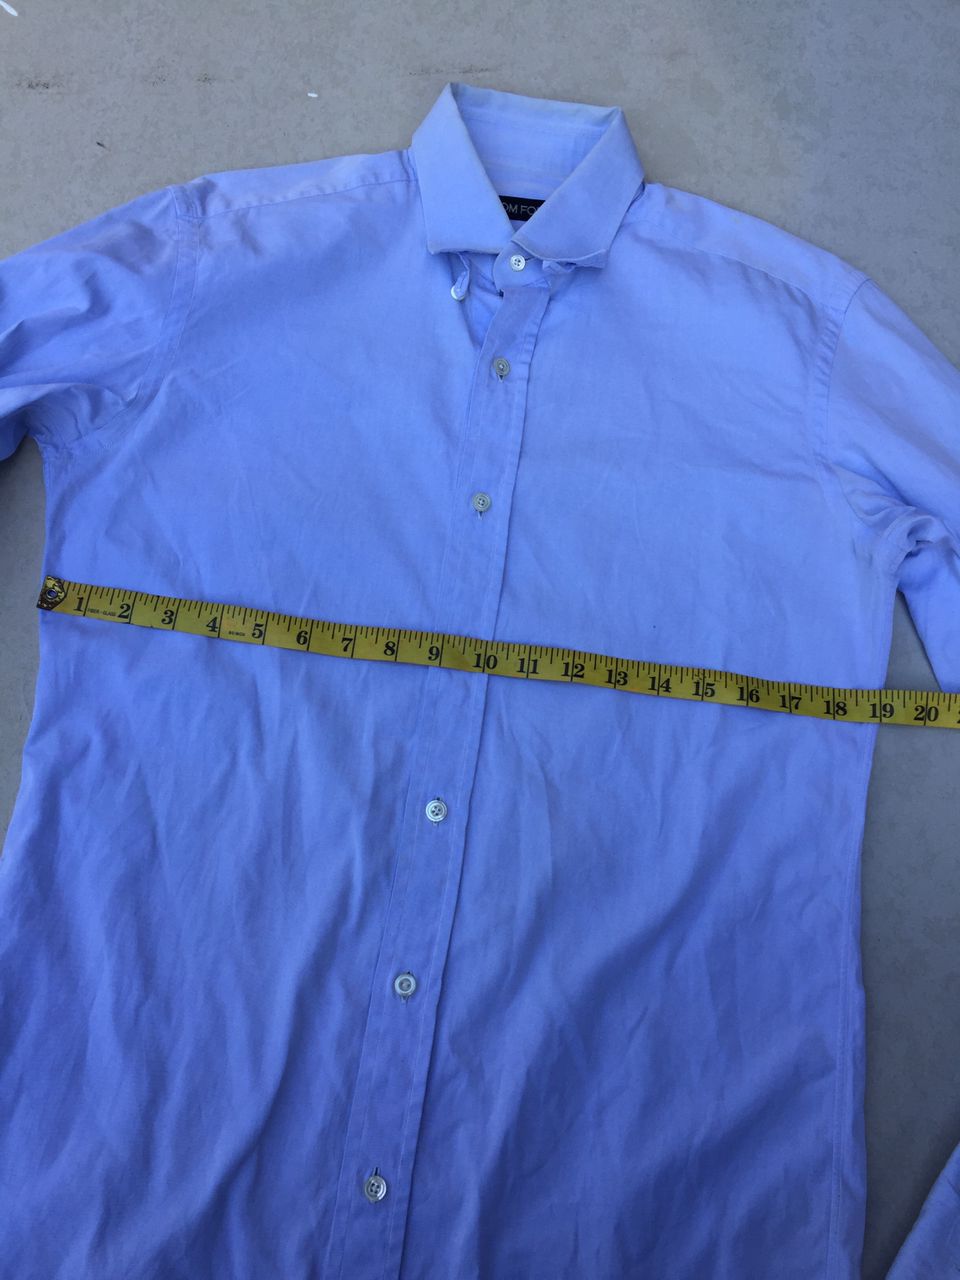 Tom Ford French Cuff button ups shirt - 24